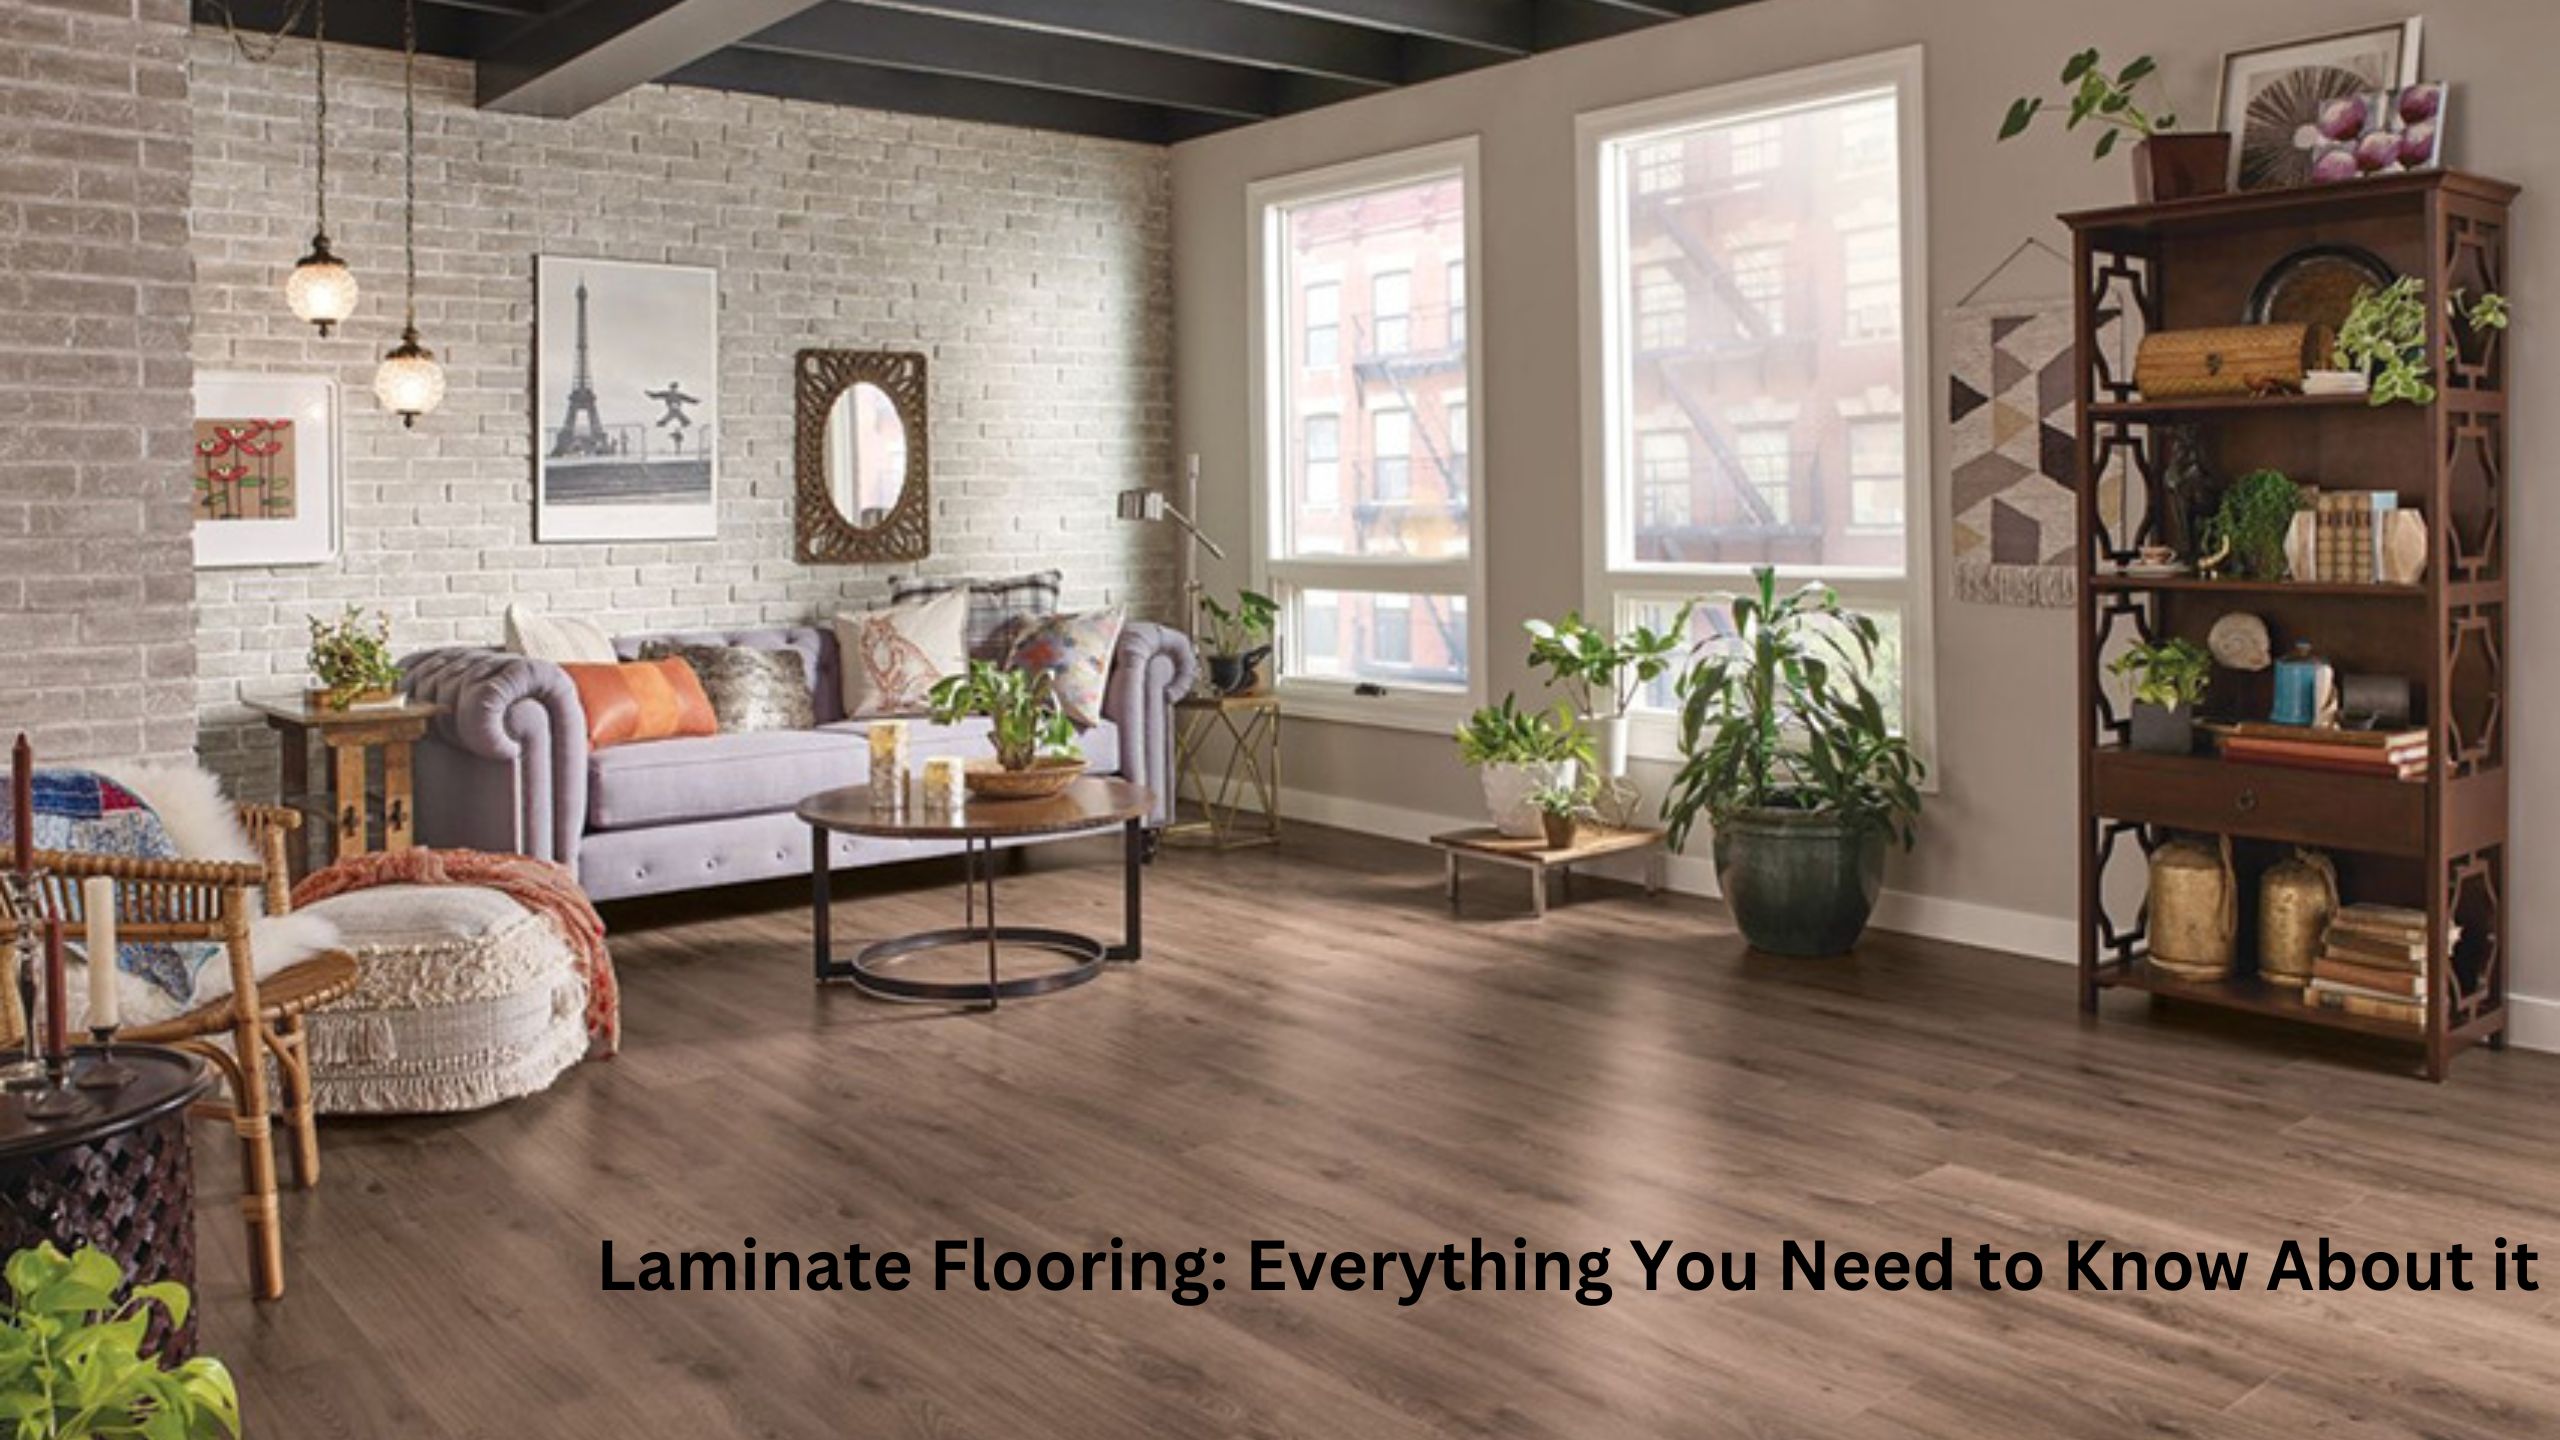 Laminate Flooring Everything You Need to Know About it